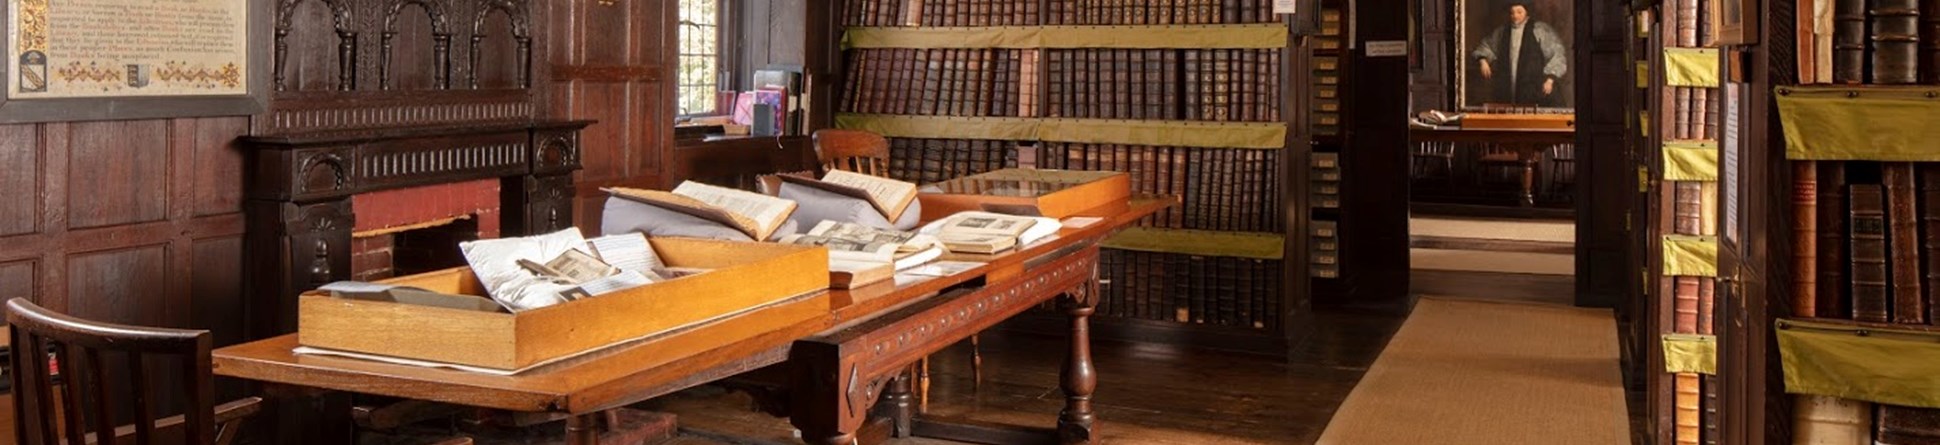 The library room shows dark wood panelling, wooden floorboard and dark wood bookcases with a long table to the left, covered in historic books. Historic portraits line the walls.